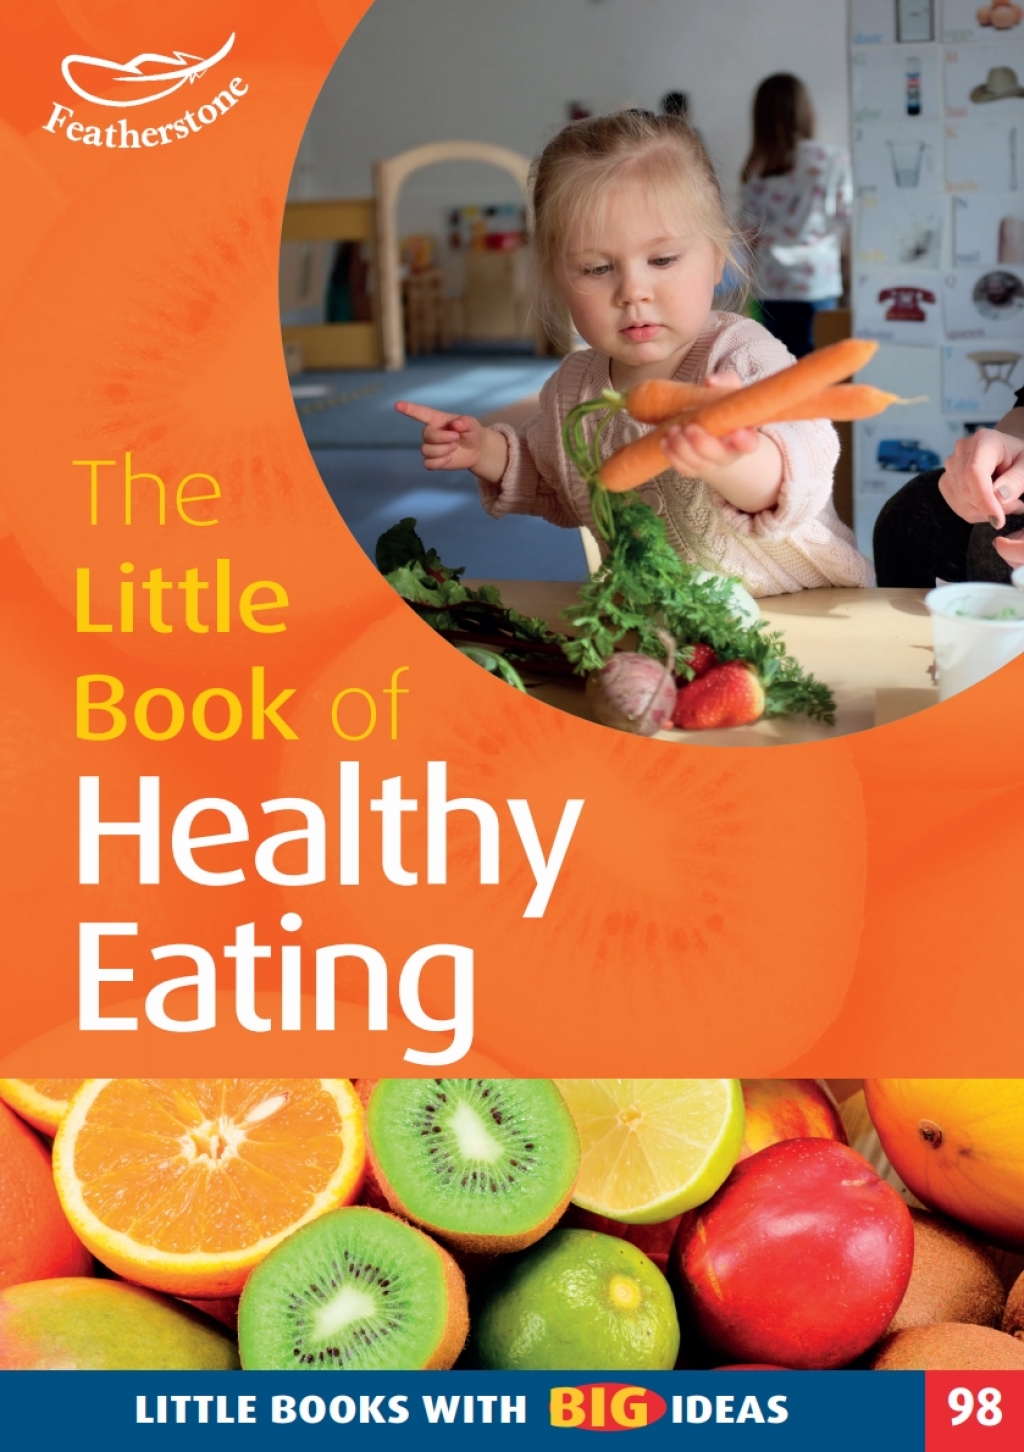 The Little Book of Healthy Eating (eBook) - Amicia Boden